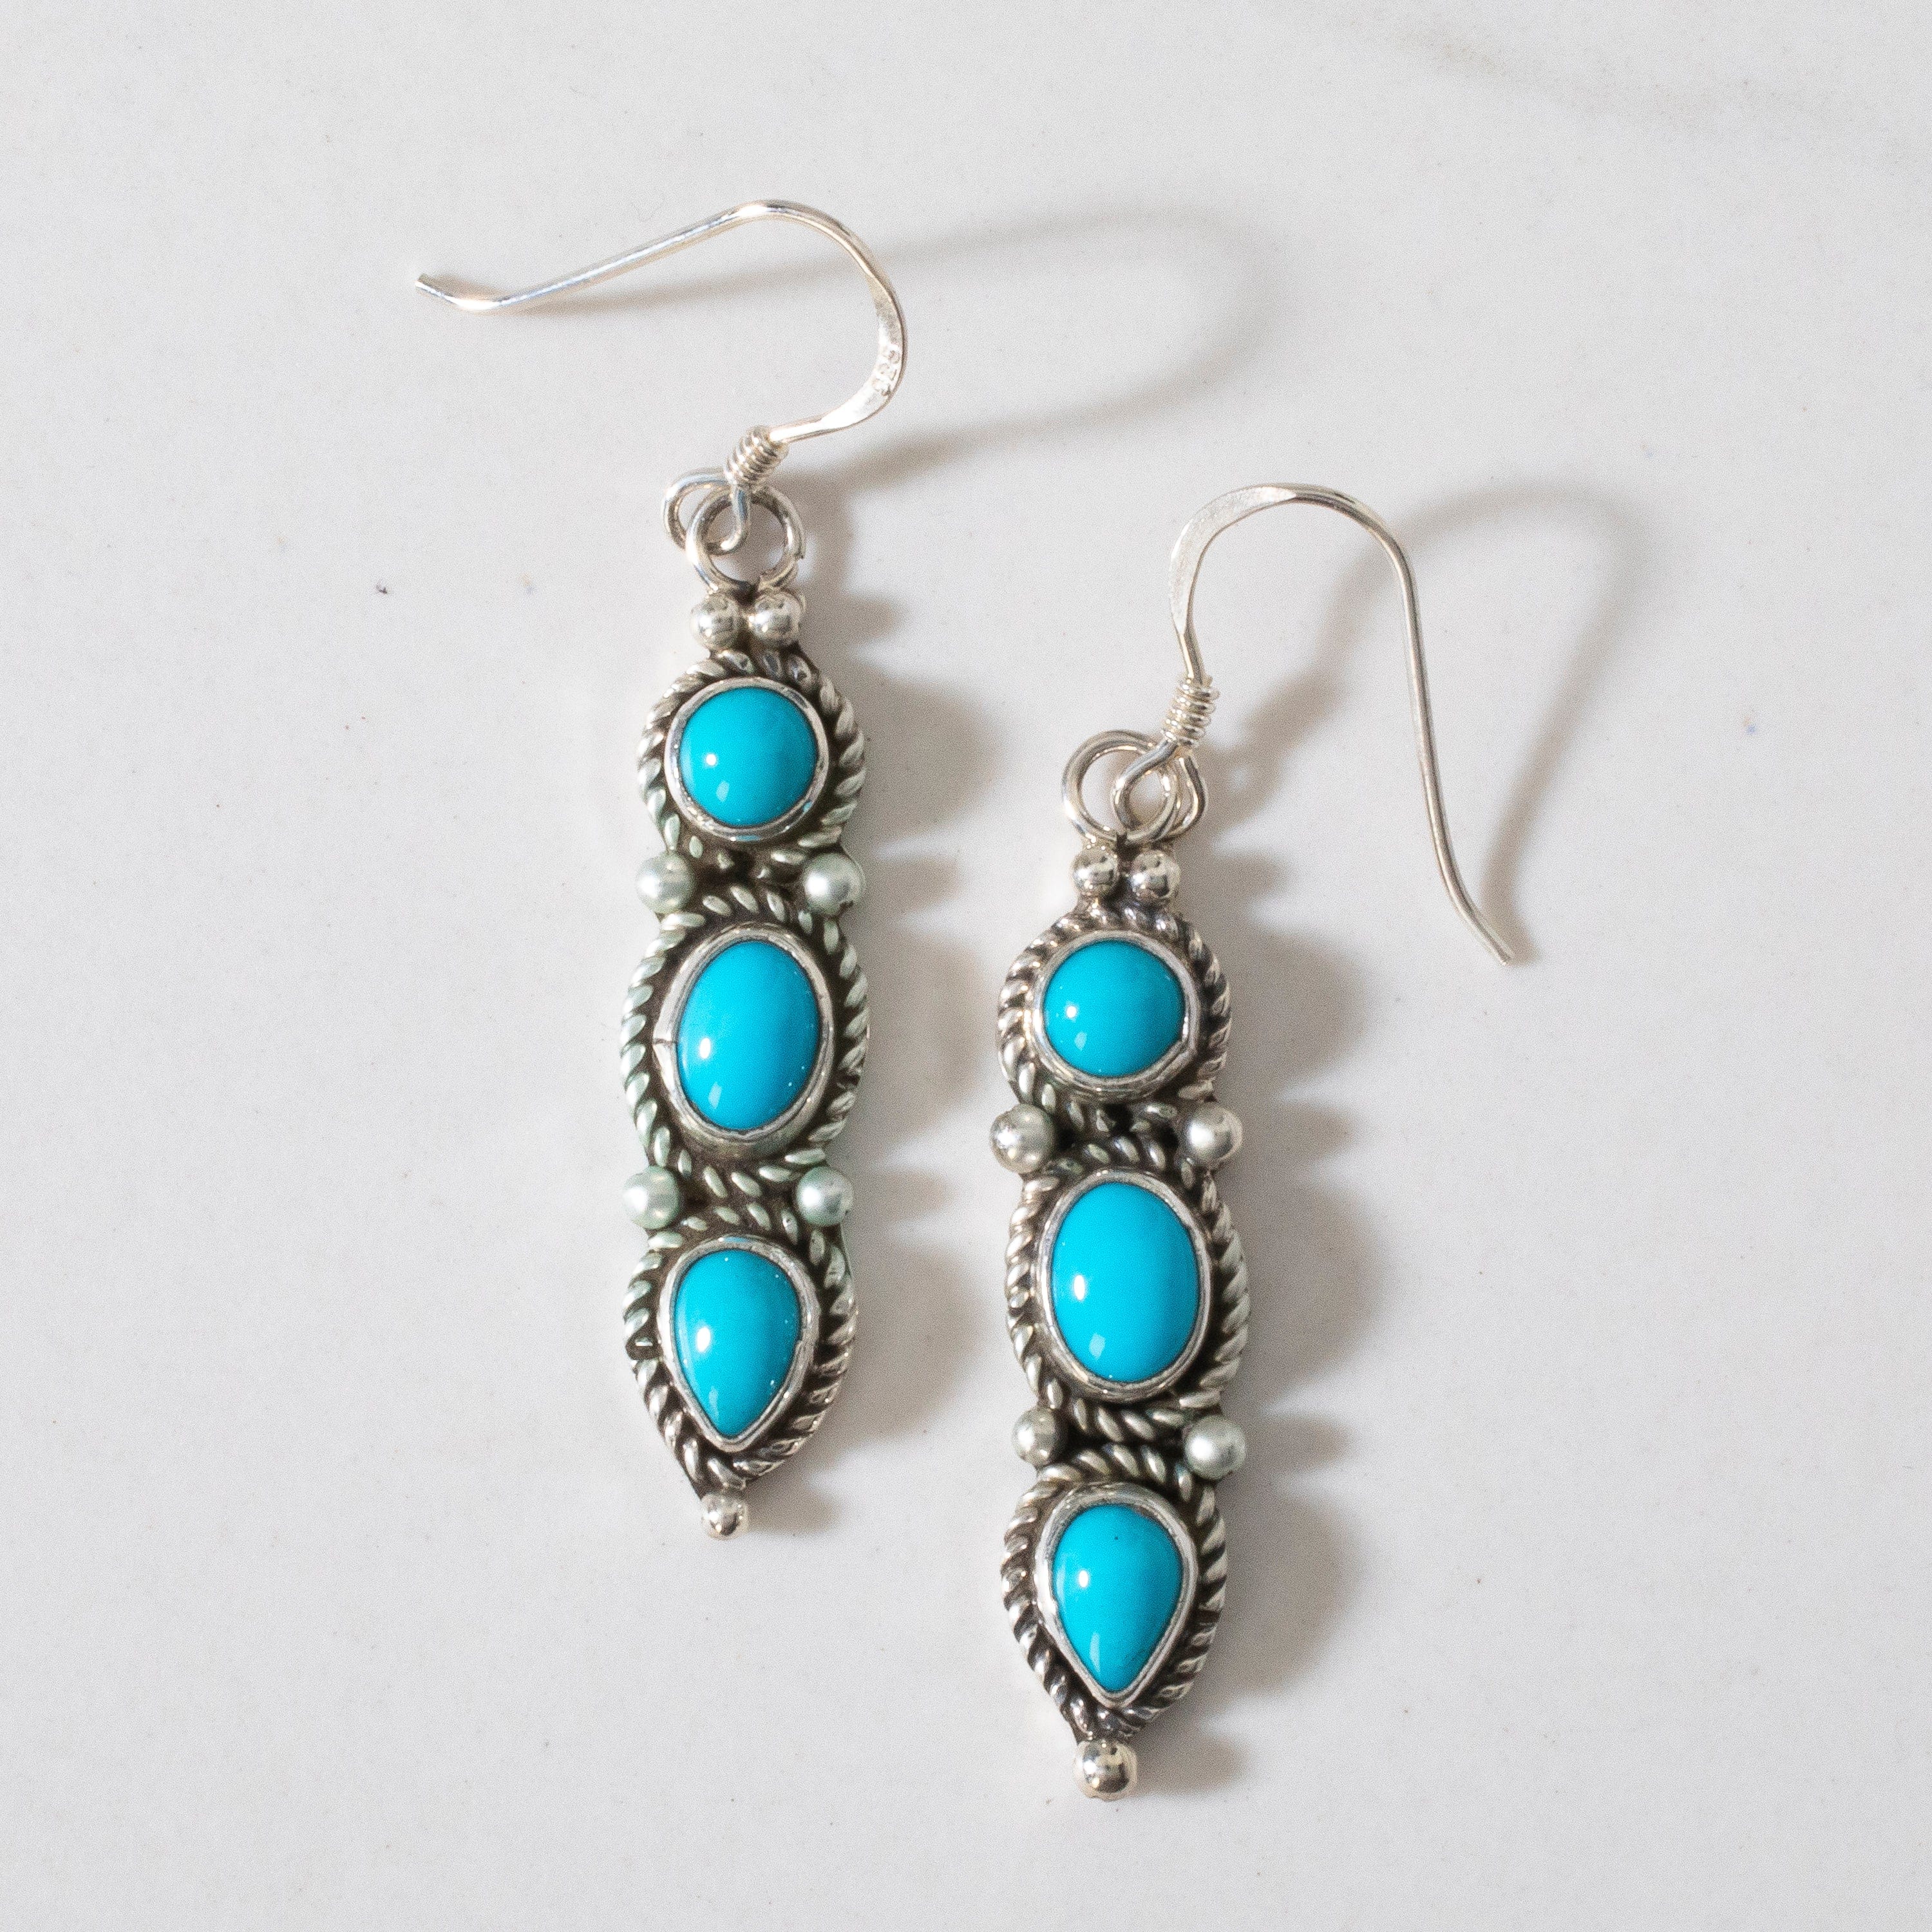 Kalifano Native American Jewelry Sleeping Beauty Turquoise Dangle Navajo USA Native American Made 925 Sterling Silver Earrings with French Hook NAE500.009